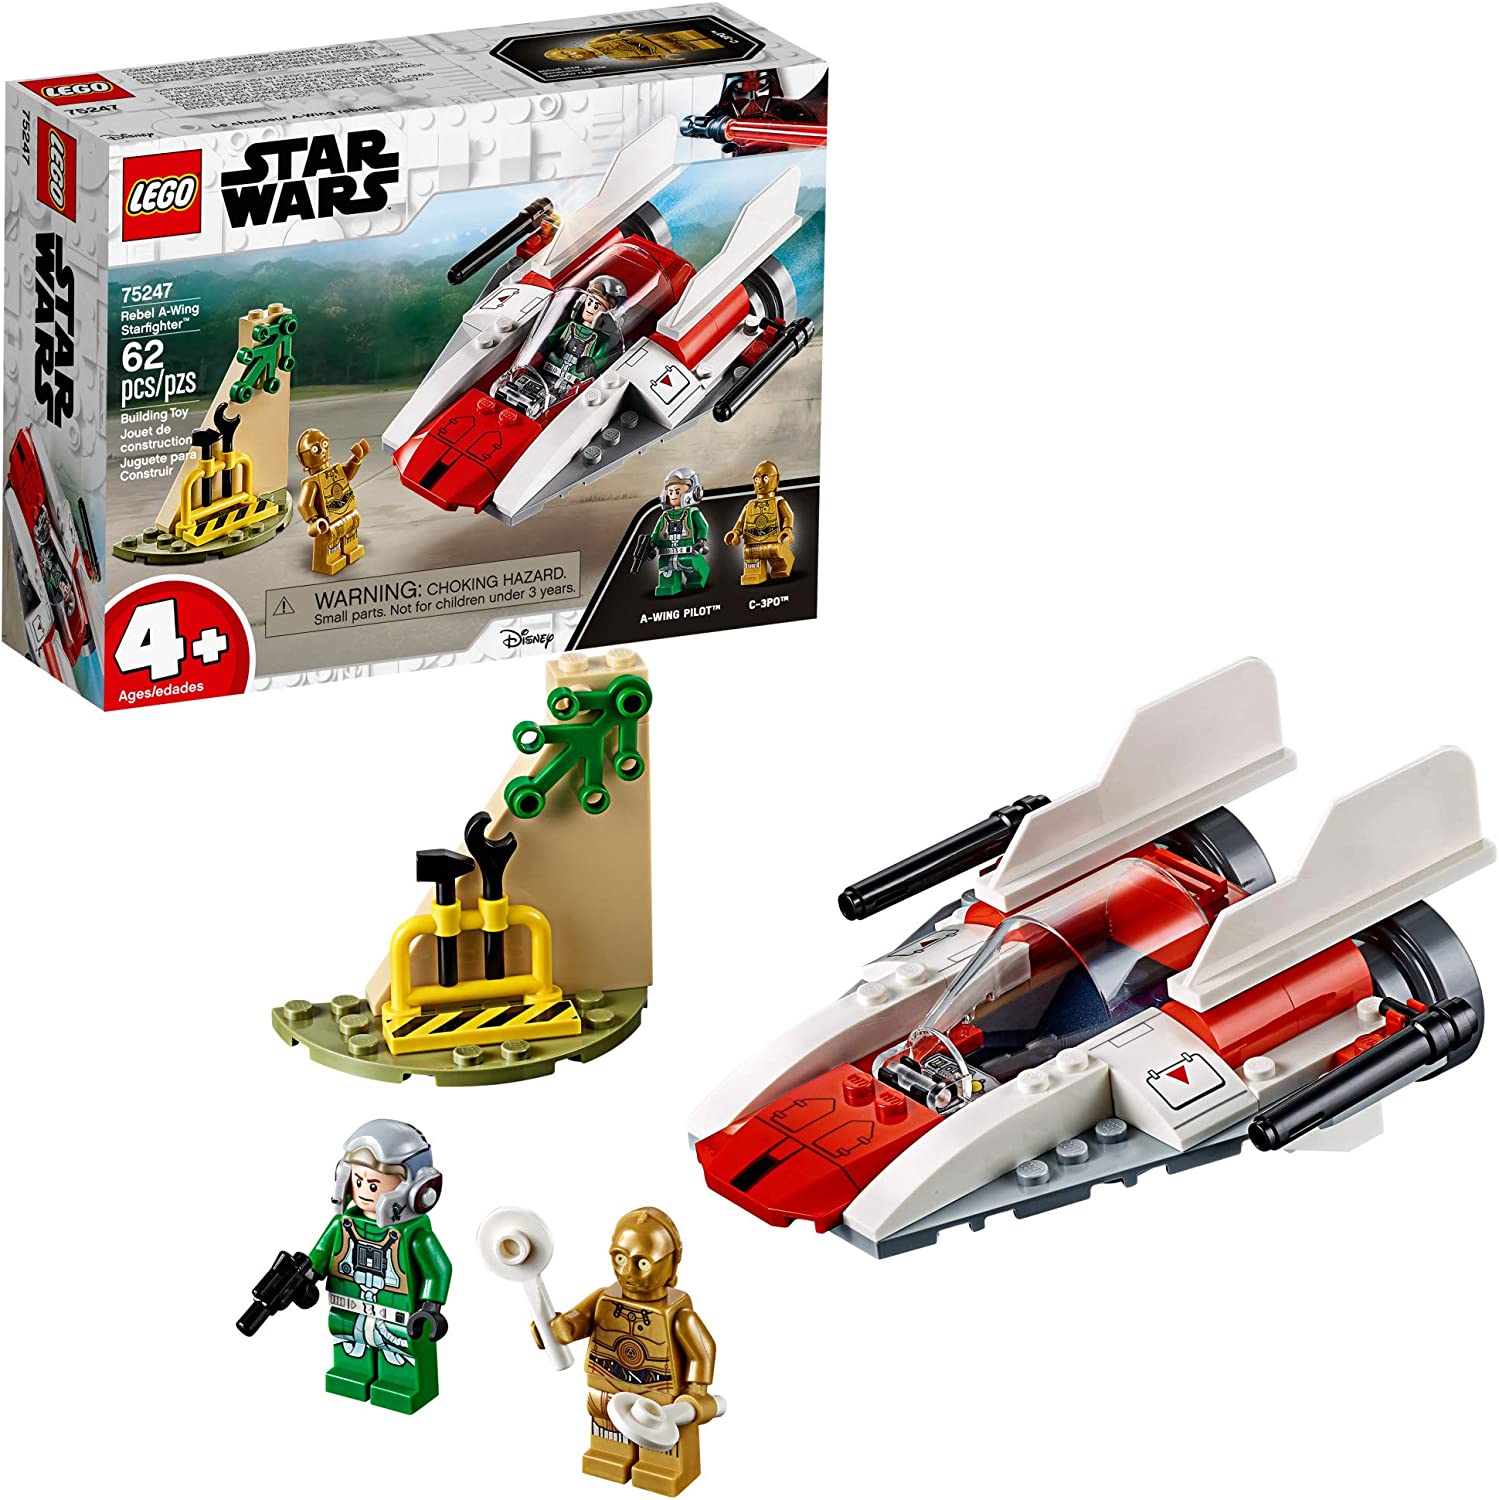 Lego Wars Rebel A Wing Starfighter Kit 75247 (62 Pieces) – Hollywood Heroes